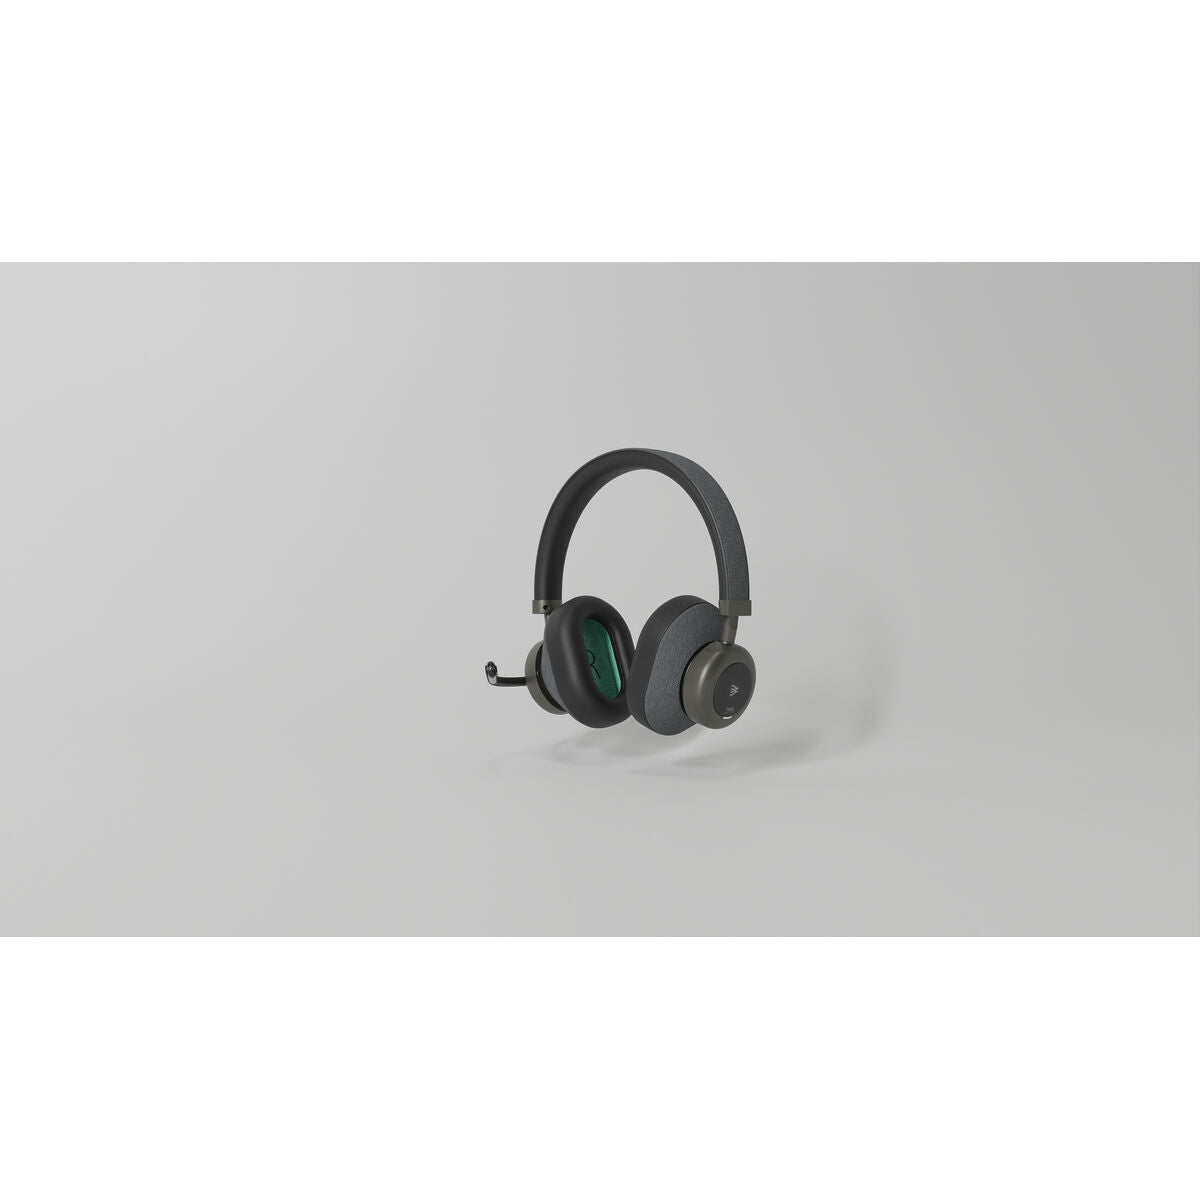 Headphones TPROPLUS-C Black Grey, N/A, Electronics, Mobile communication and accessories, headphones-tproplus-c-black-grey, :Wireless Headphones, Brand_N/A, category-reference-2609, category-reference-2642, category-reference-2847, category-reference-t-19653, category-reference-t-21312, category-reference-t-25535, category-reference-t-4036, category-reference-t-4037, computers / peripherals, Condition_NEW, entertainment, music, office, Price_300 - 400, telephones & tablets, Teleworking, RiotNook